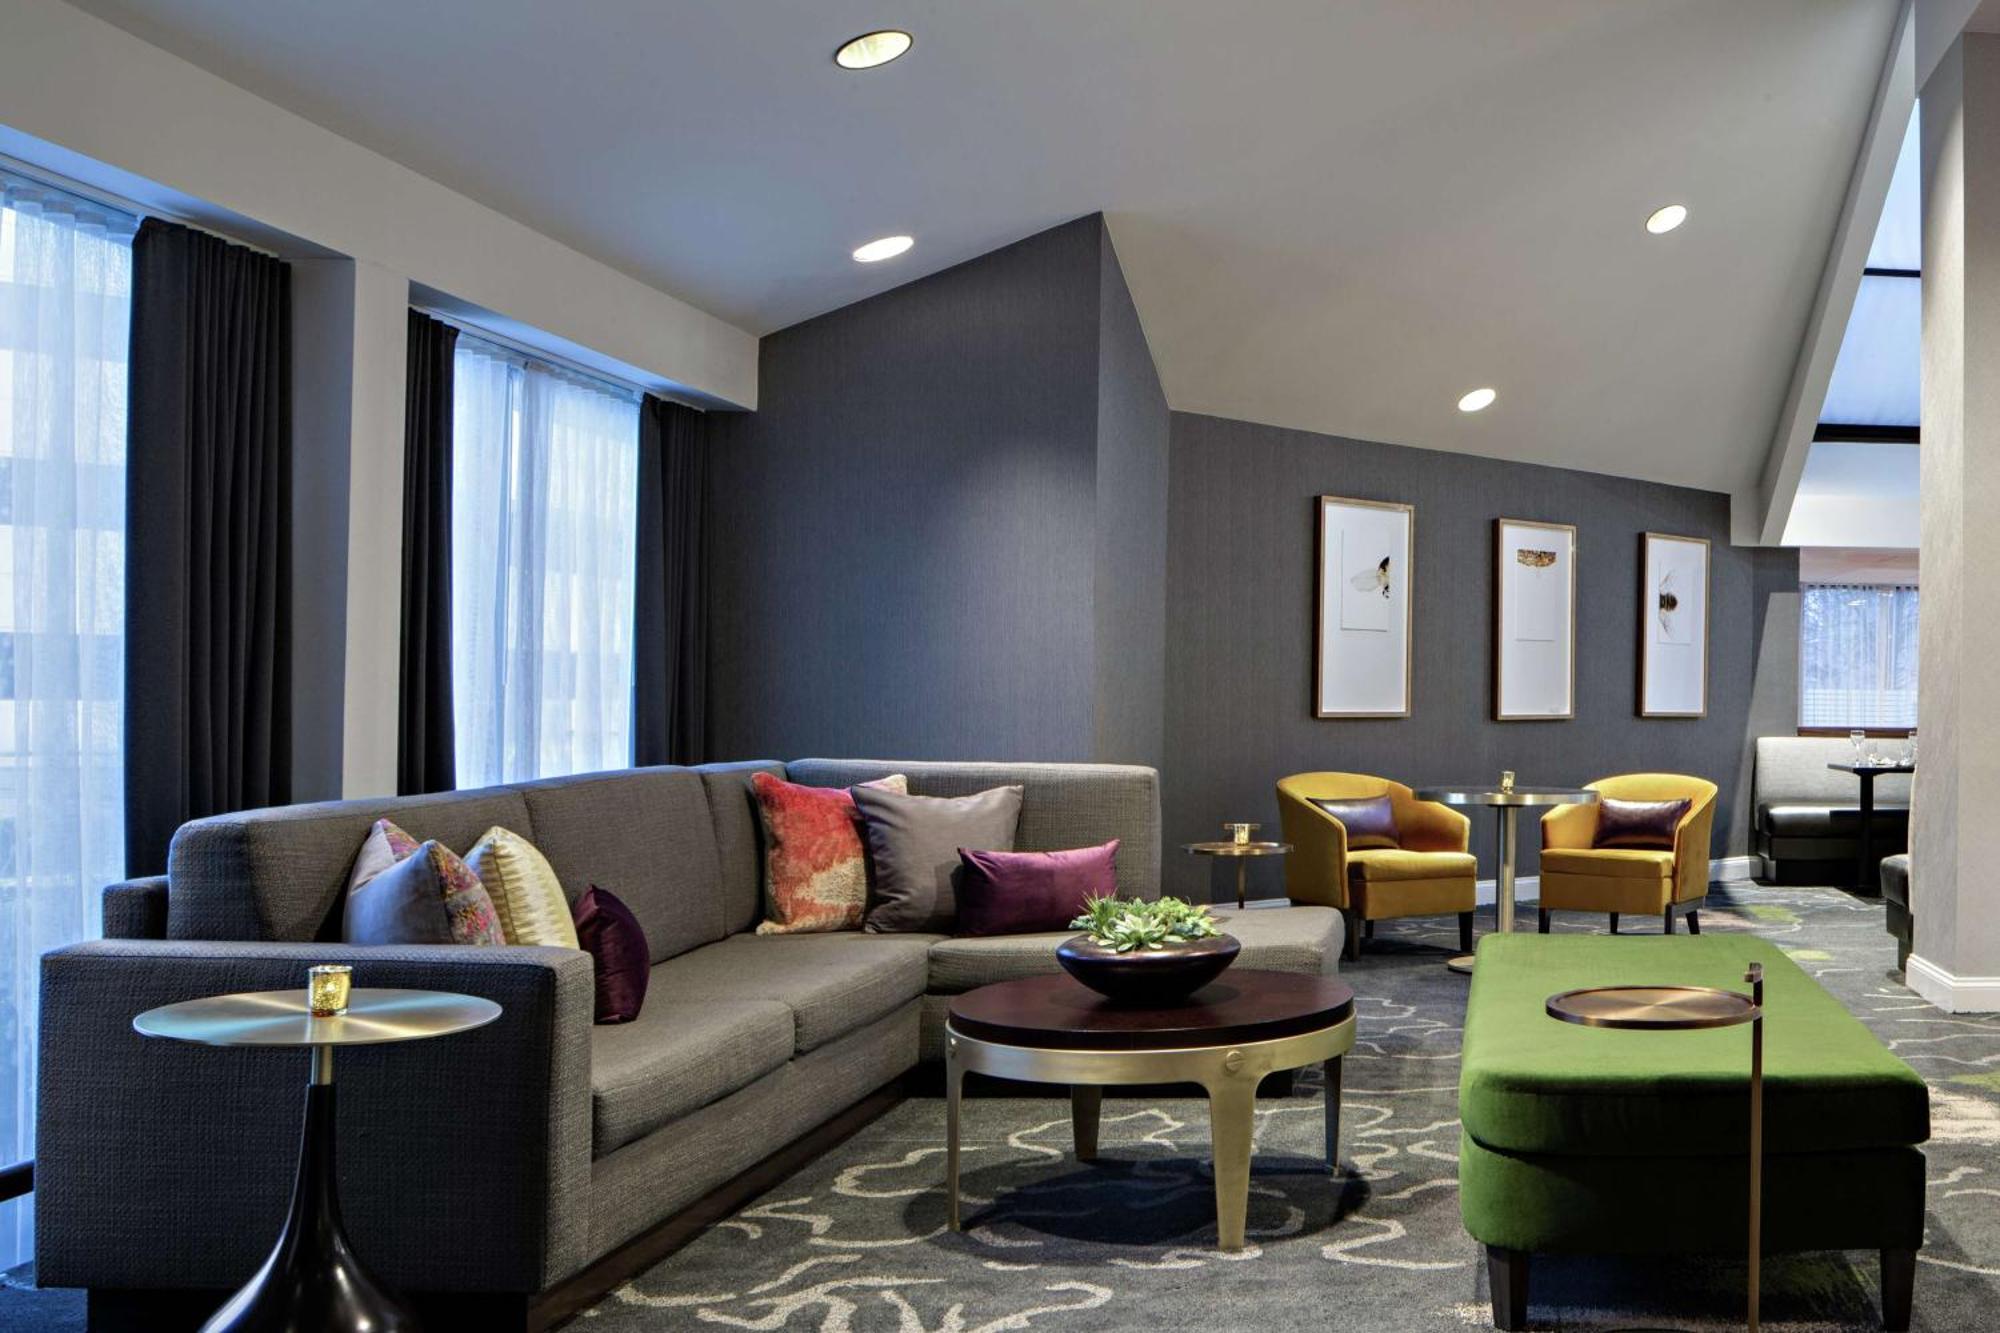 Doubletree By Hilton Fairfield Hotel & Suites Экстерьер фото